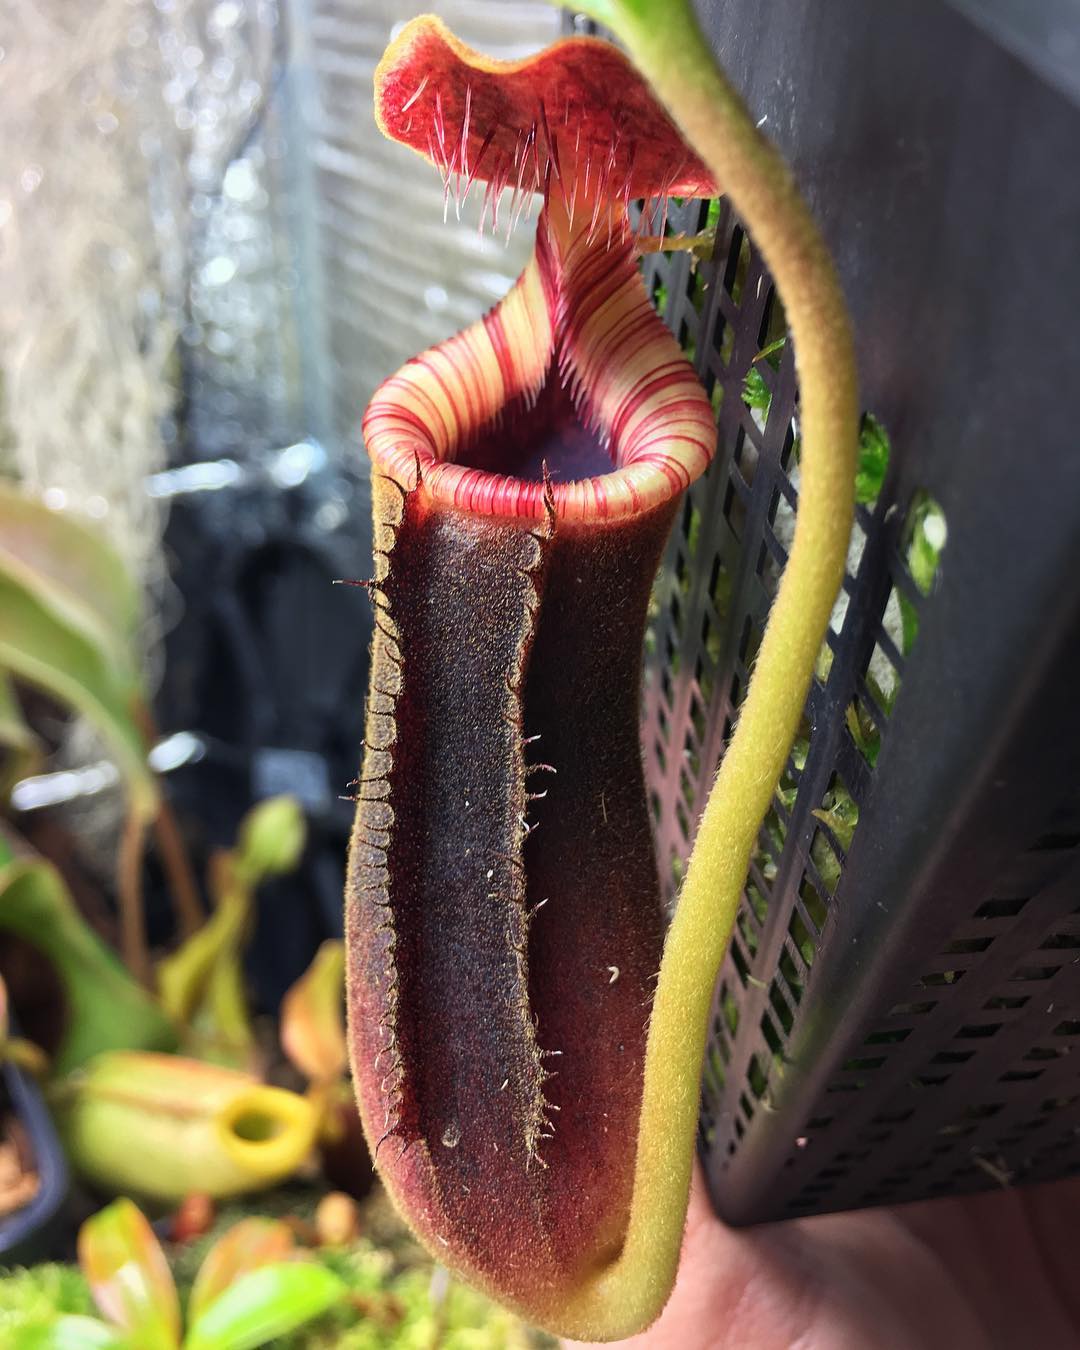 Nepenthes lowii grown by Aidan.